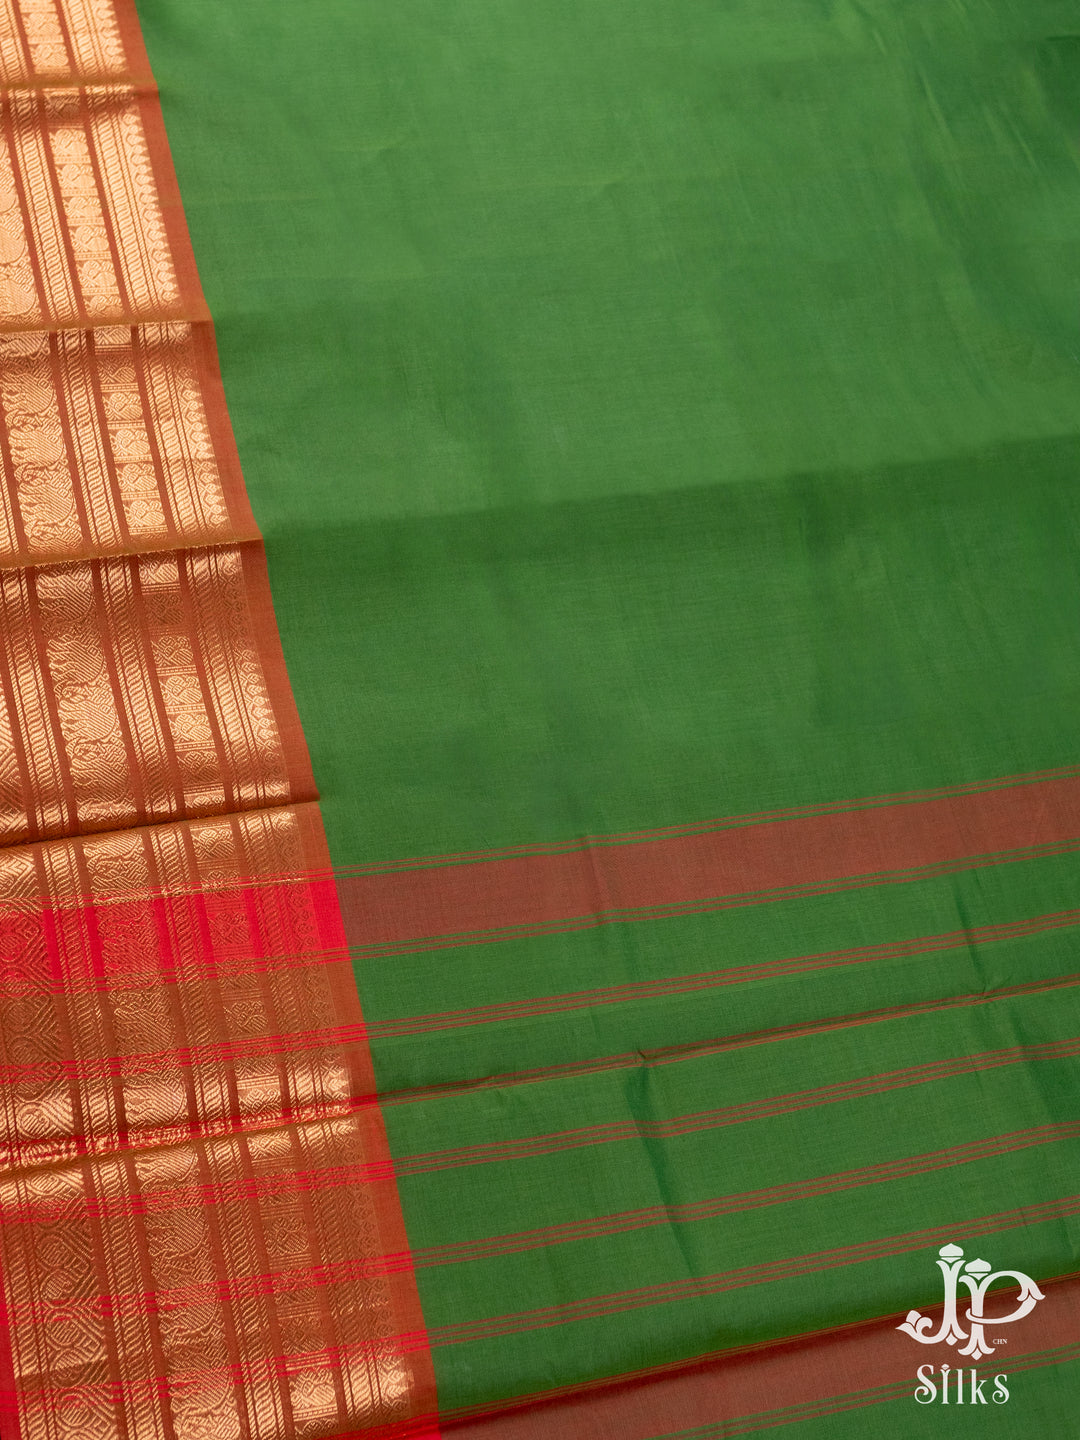 Green and Brown Cotton Saree - D9625 - VIew 1